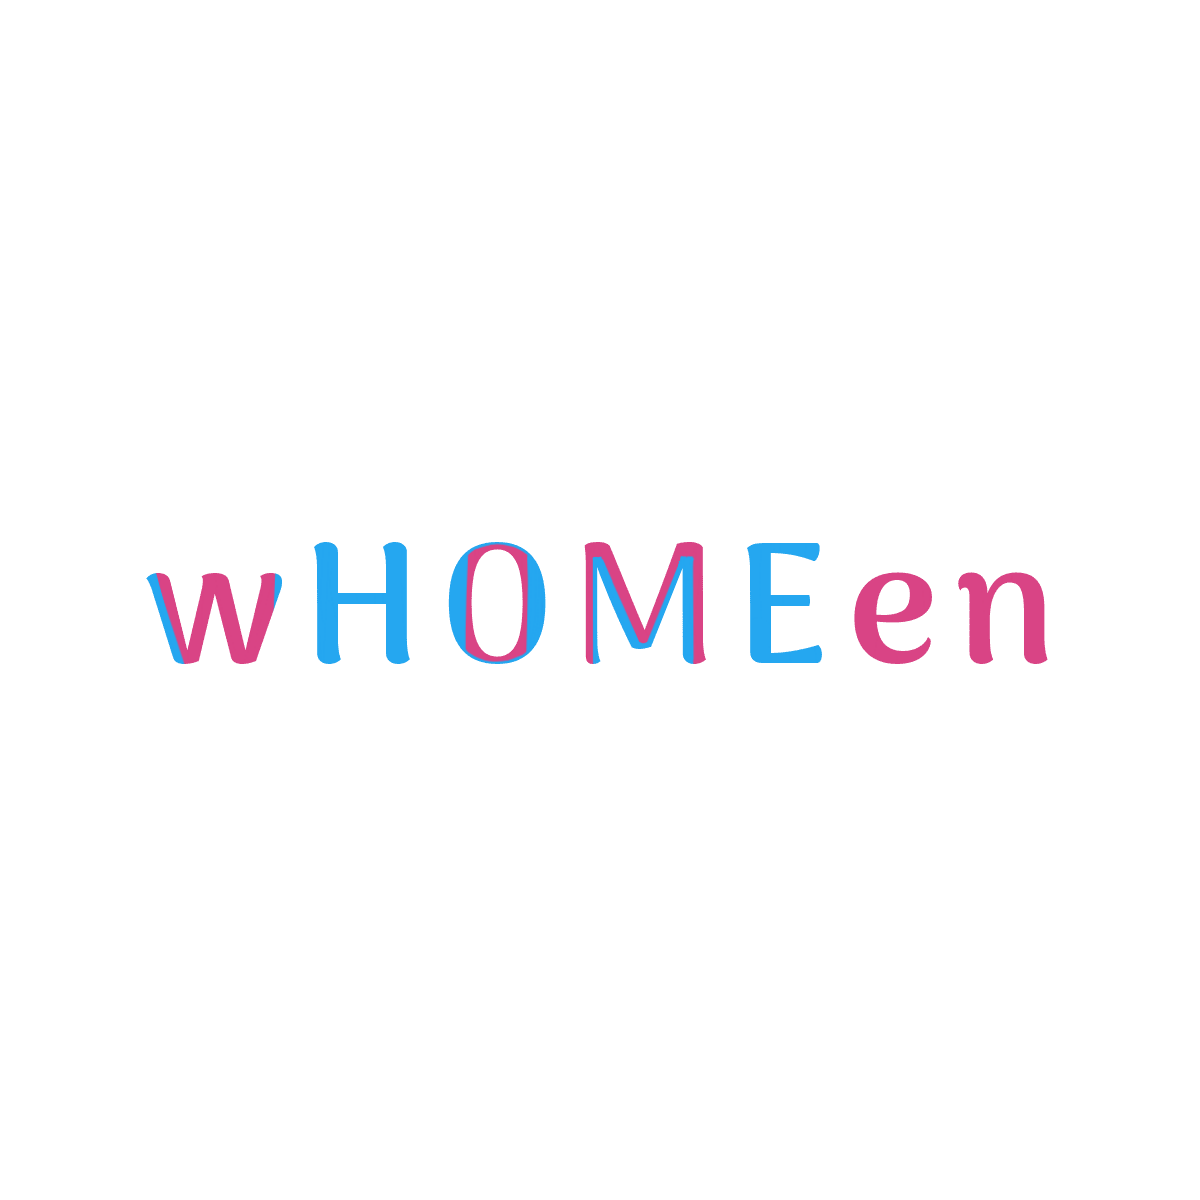 wHOMEen